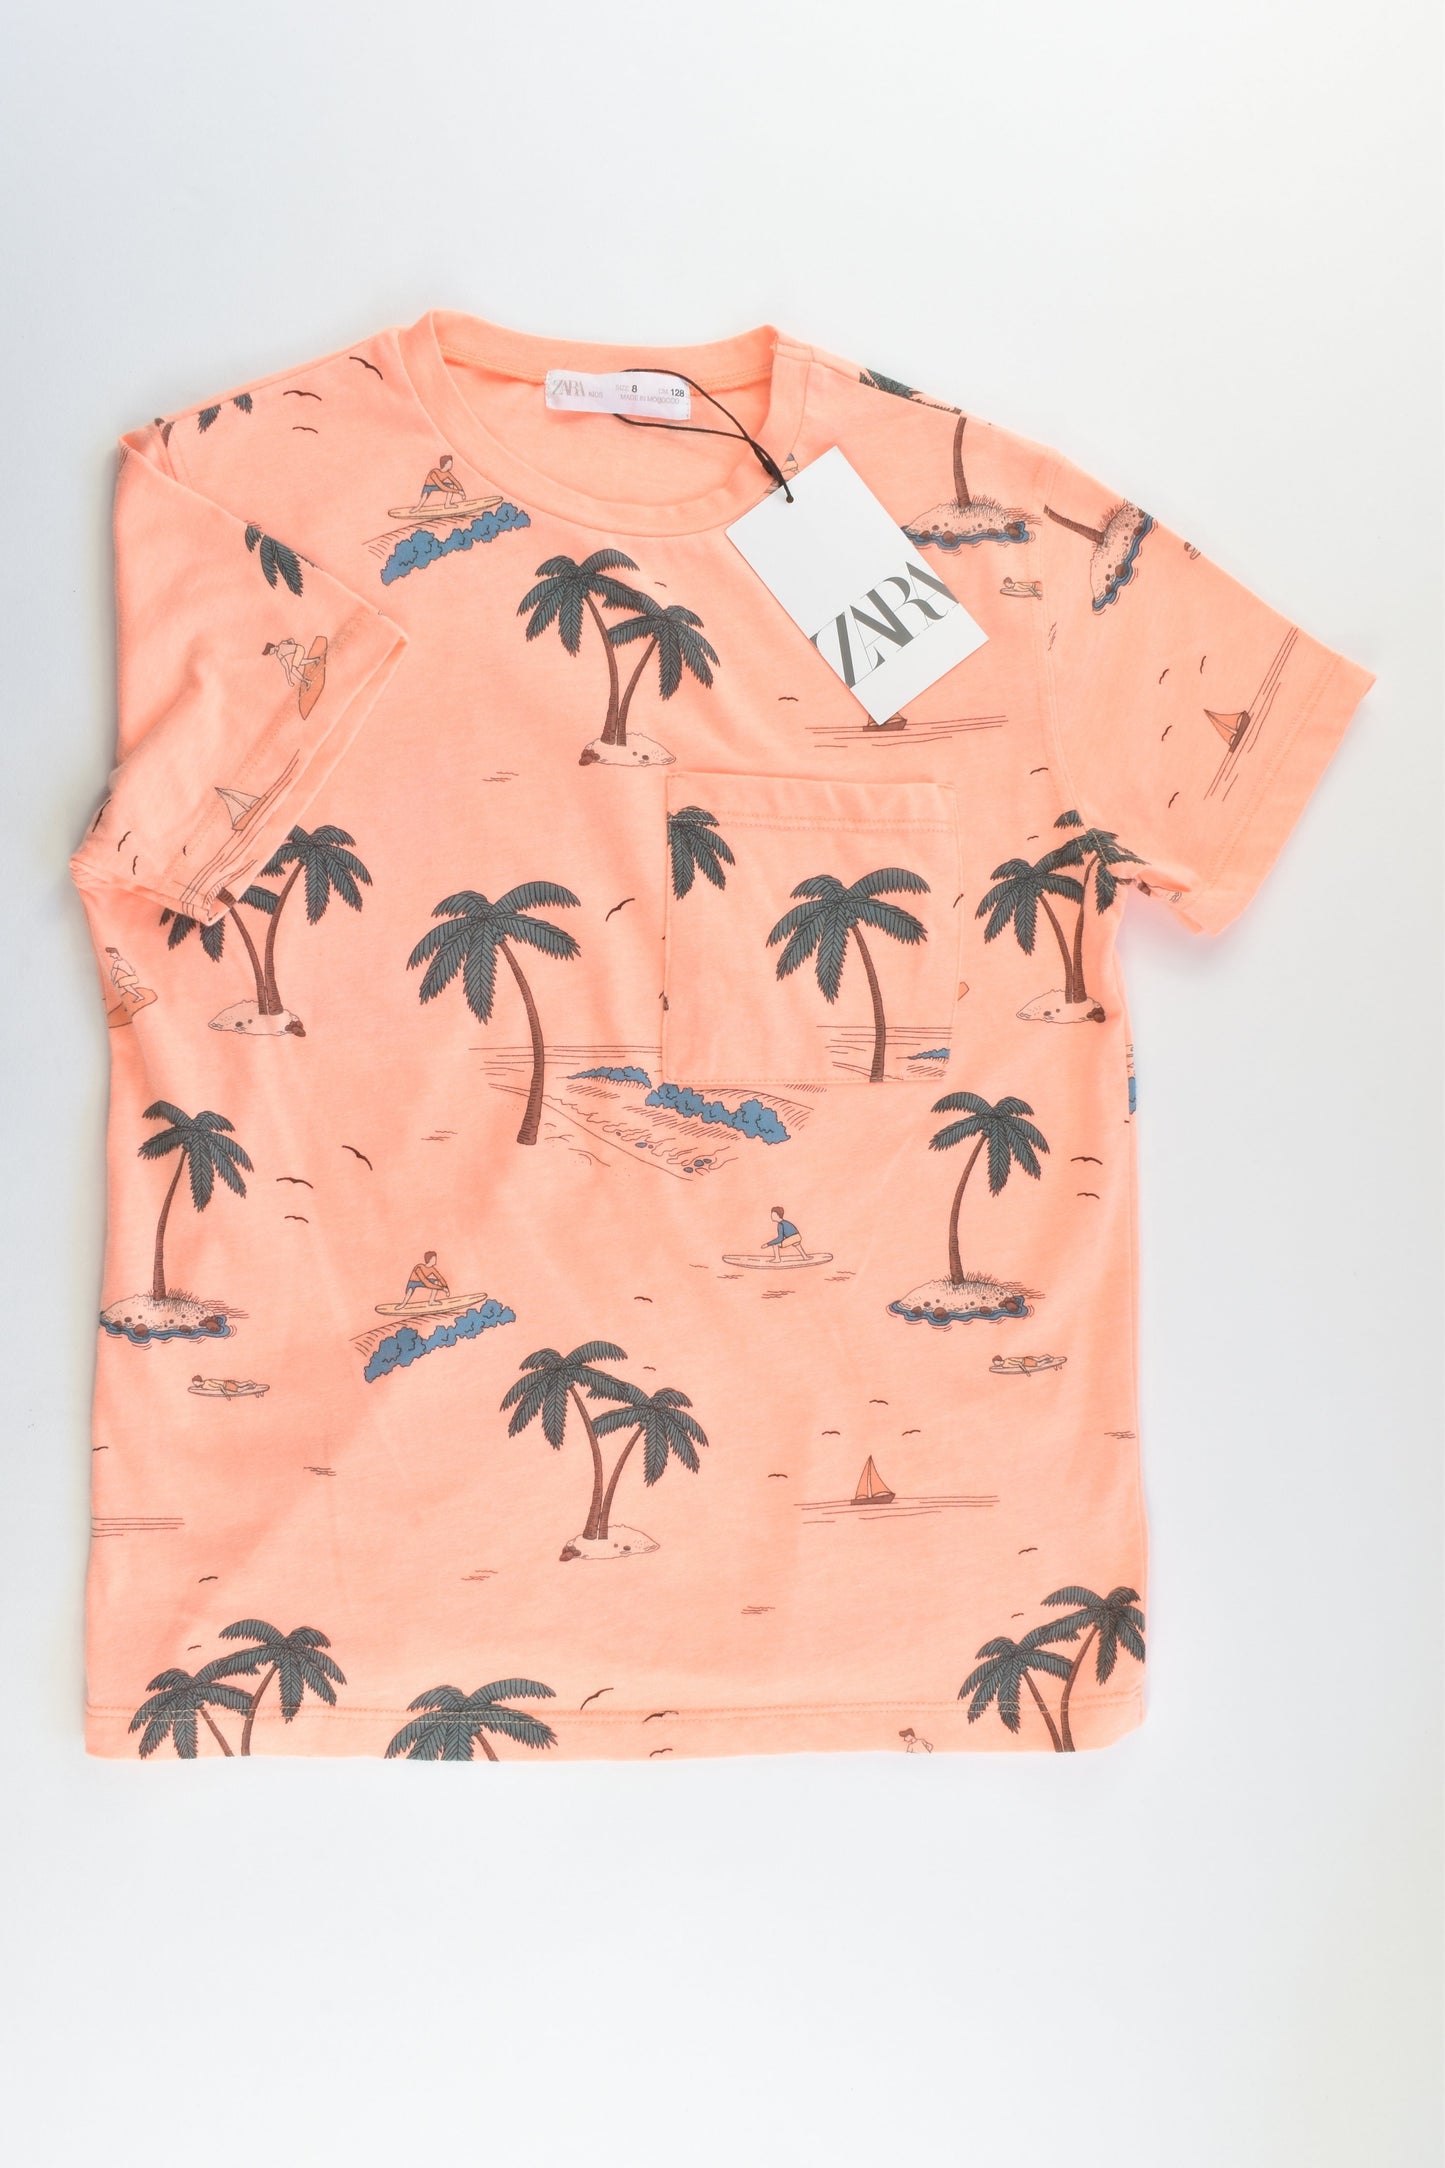 NEW Zara Size 8 (128 cm) Palm Trees and Surfer T-shirt